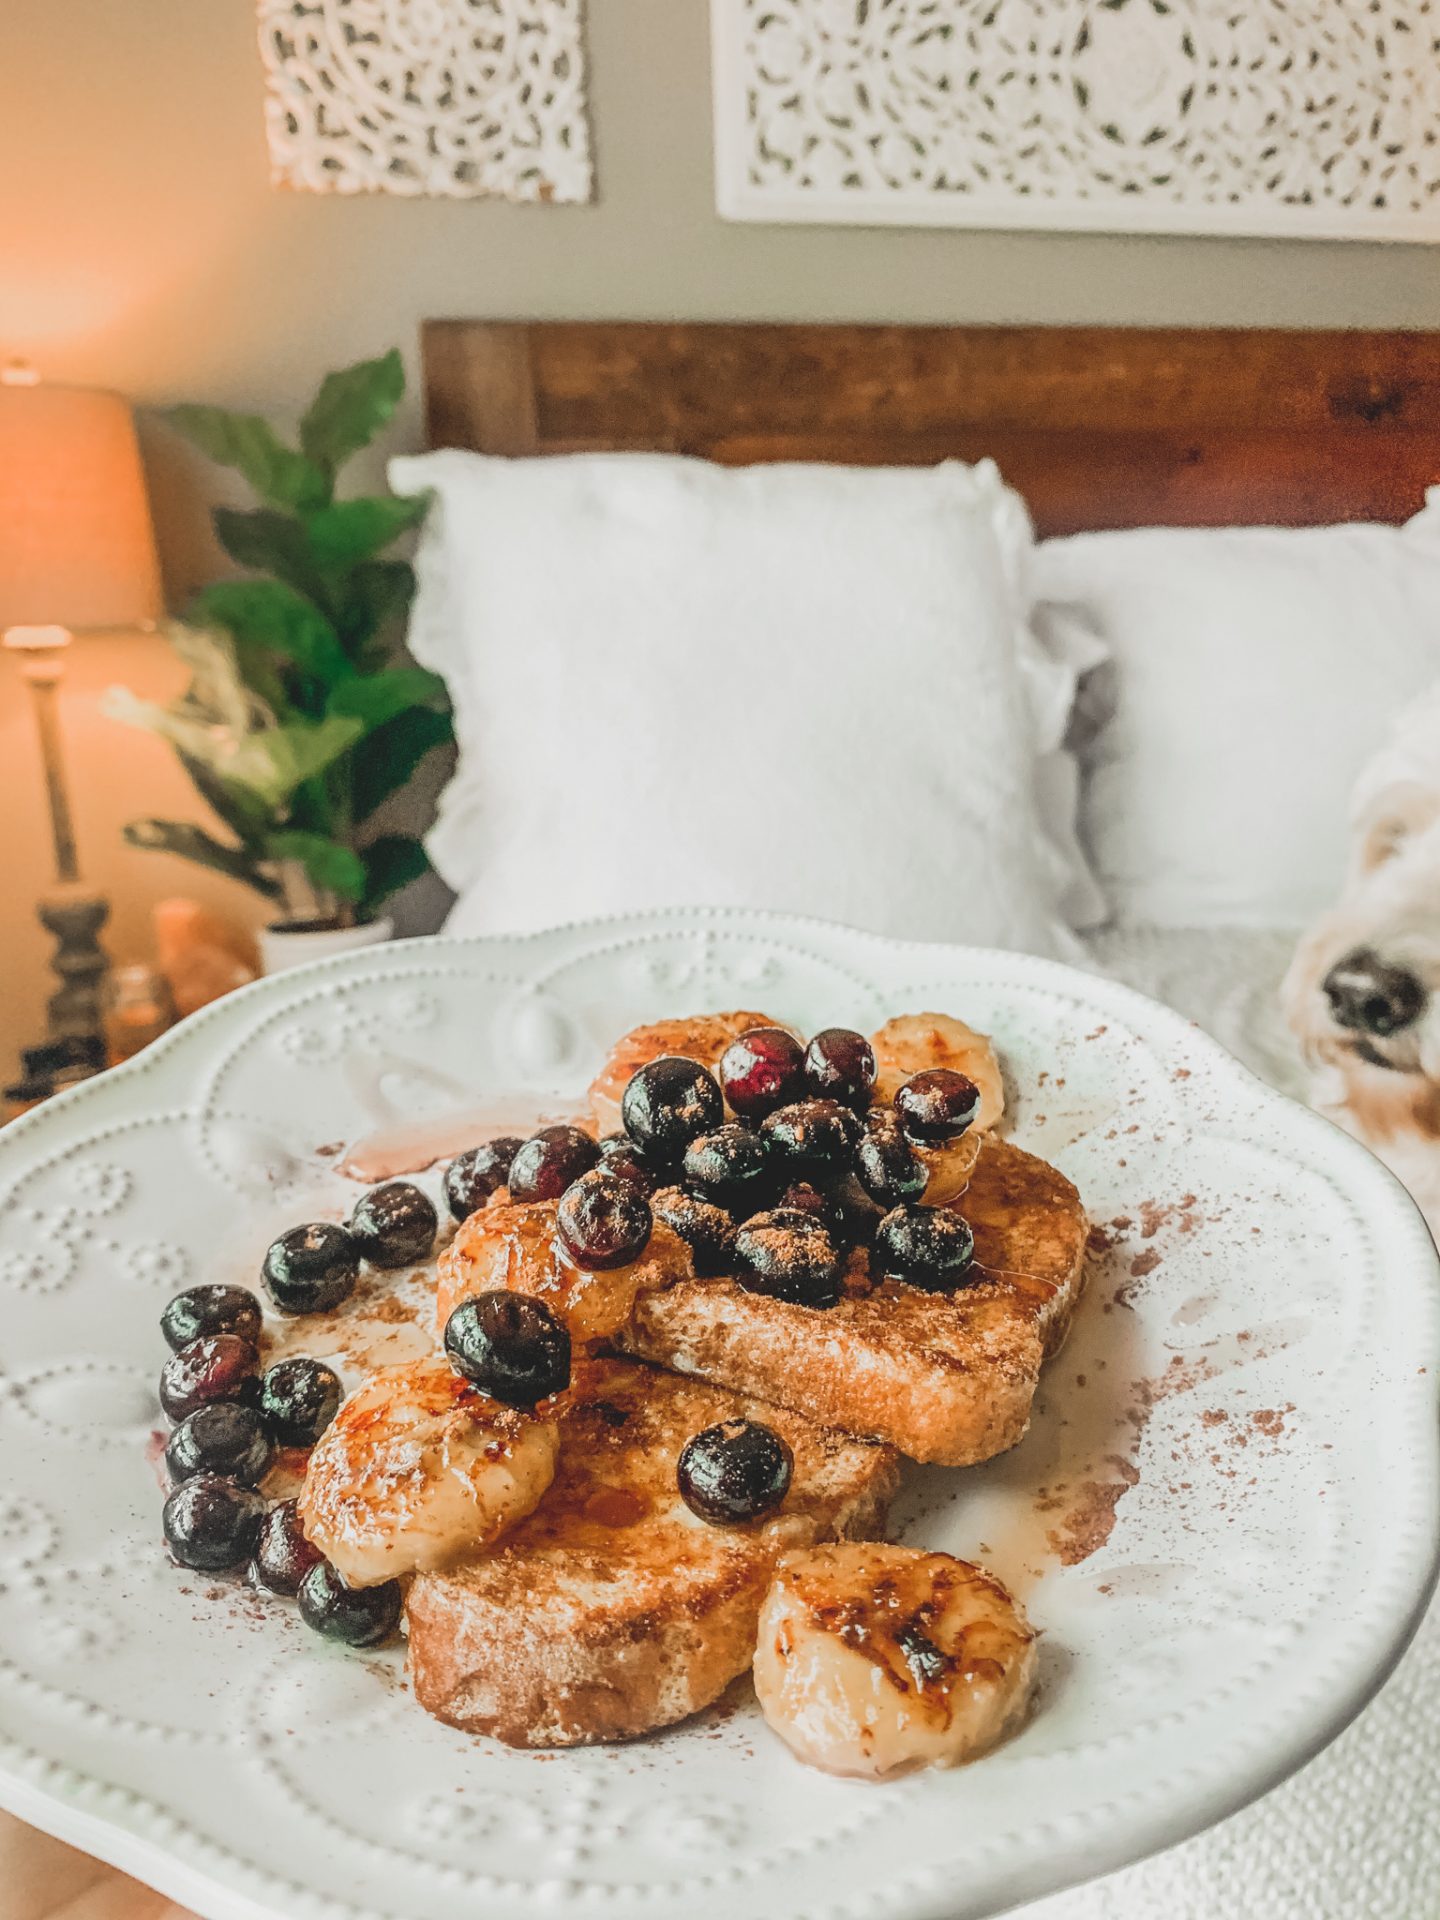 gluten free French toast with warm blueberries and fried bananas